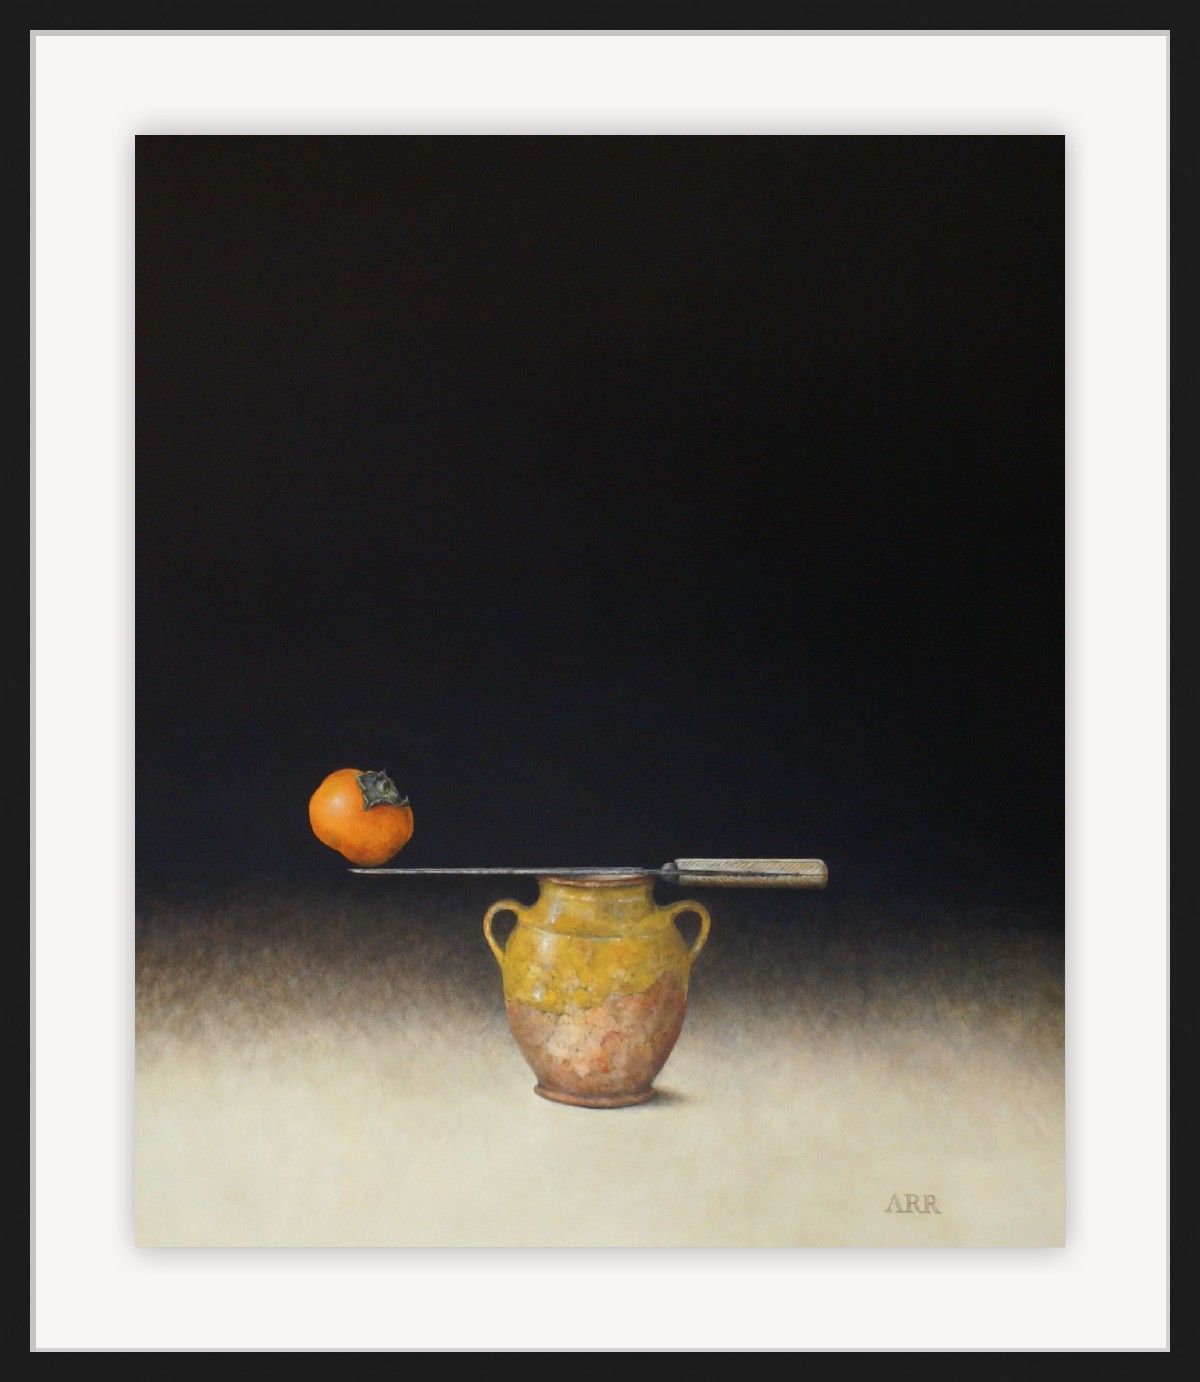 French Jar with Knife and Persimmon by Alison Rankin